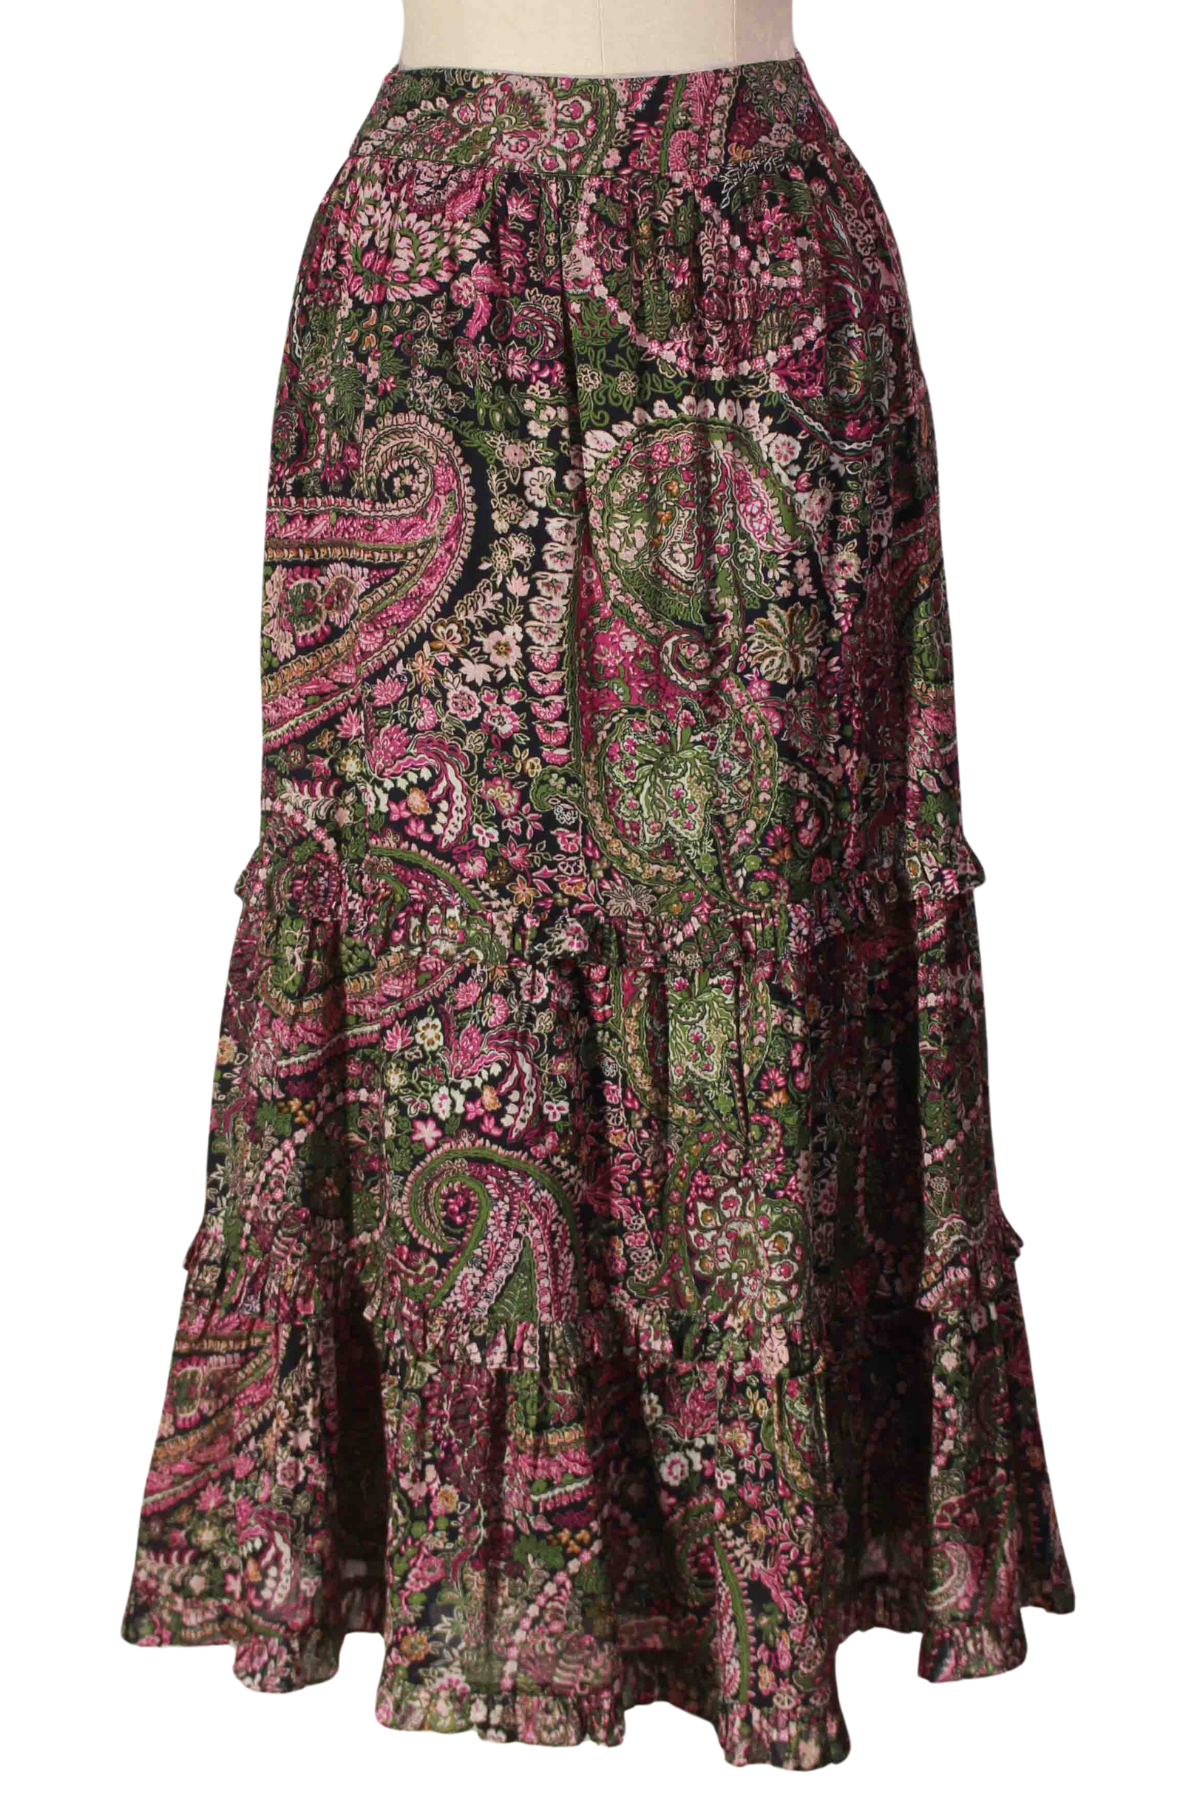 Caymen Paisley Purple Darcy Ankle Skirt by Cleobella